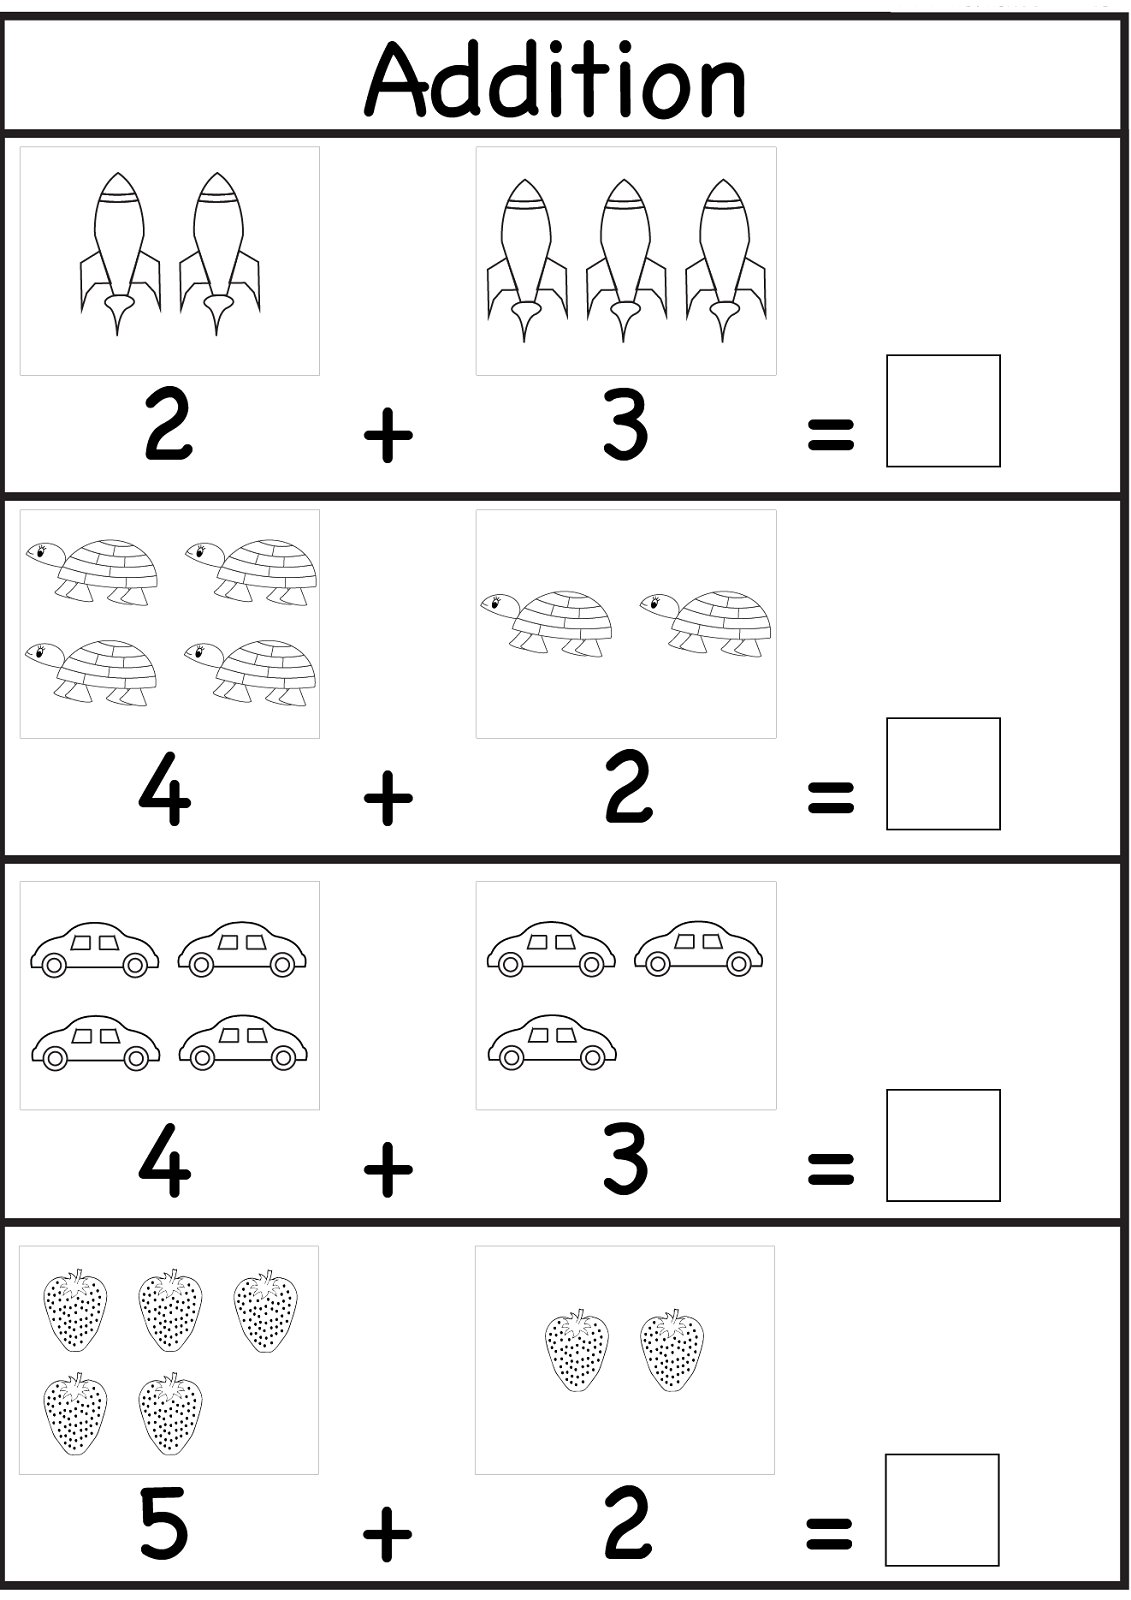 Math Is Fun Puzzle Worksheets  math puzzle worksheets 3rd gradeword search and maze combo word 